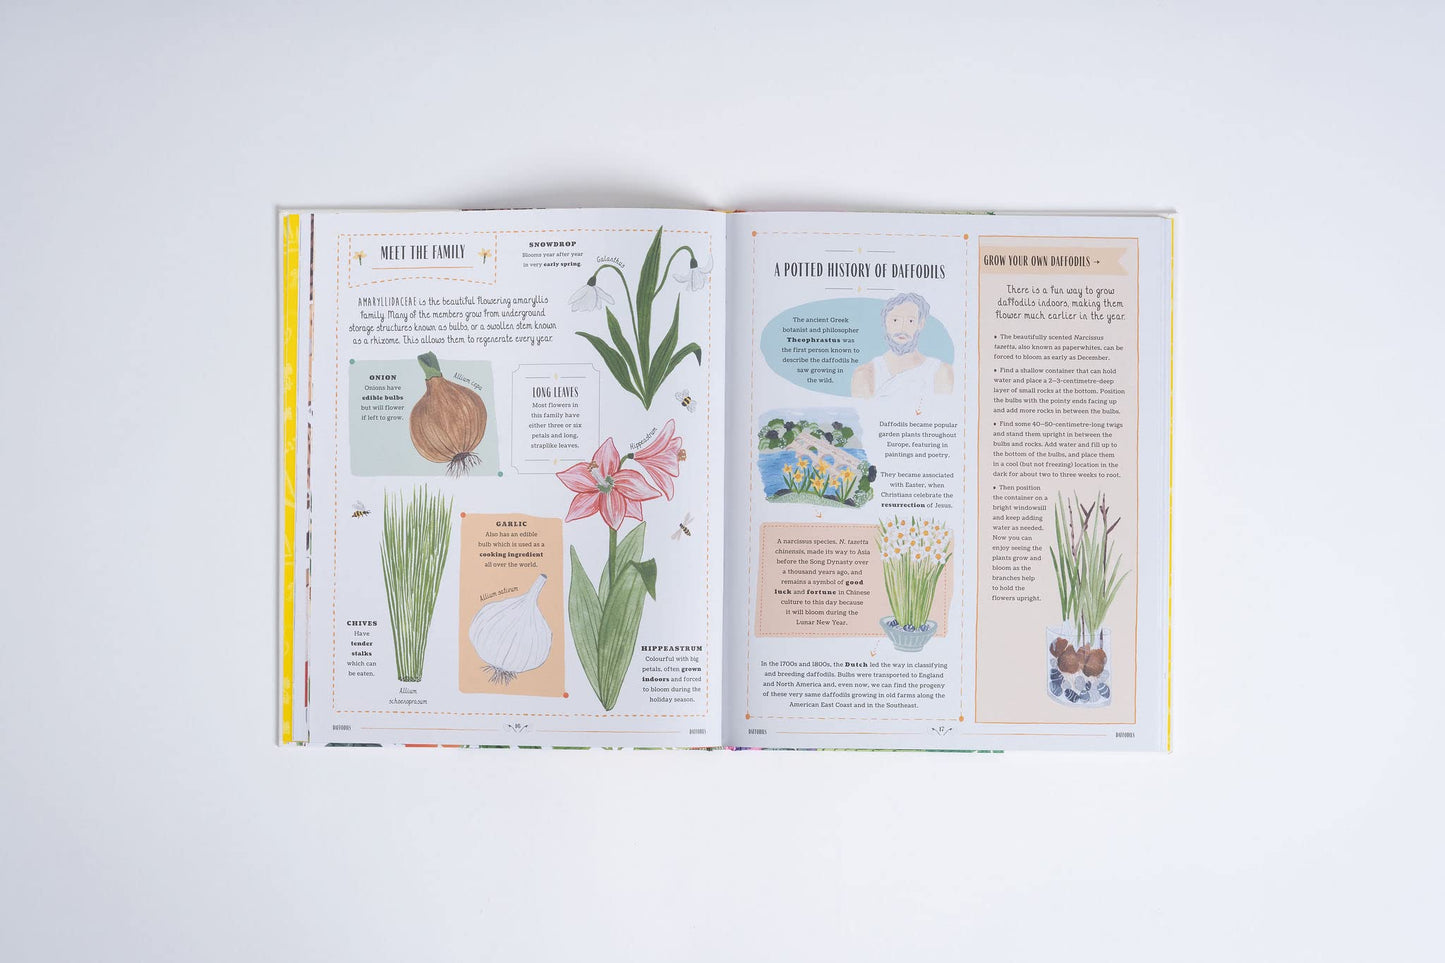 GROW a family guide to plants